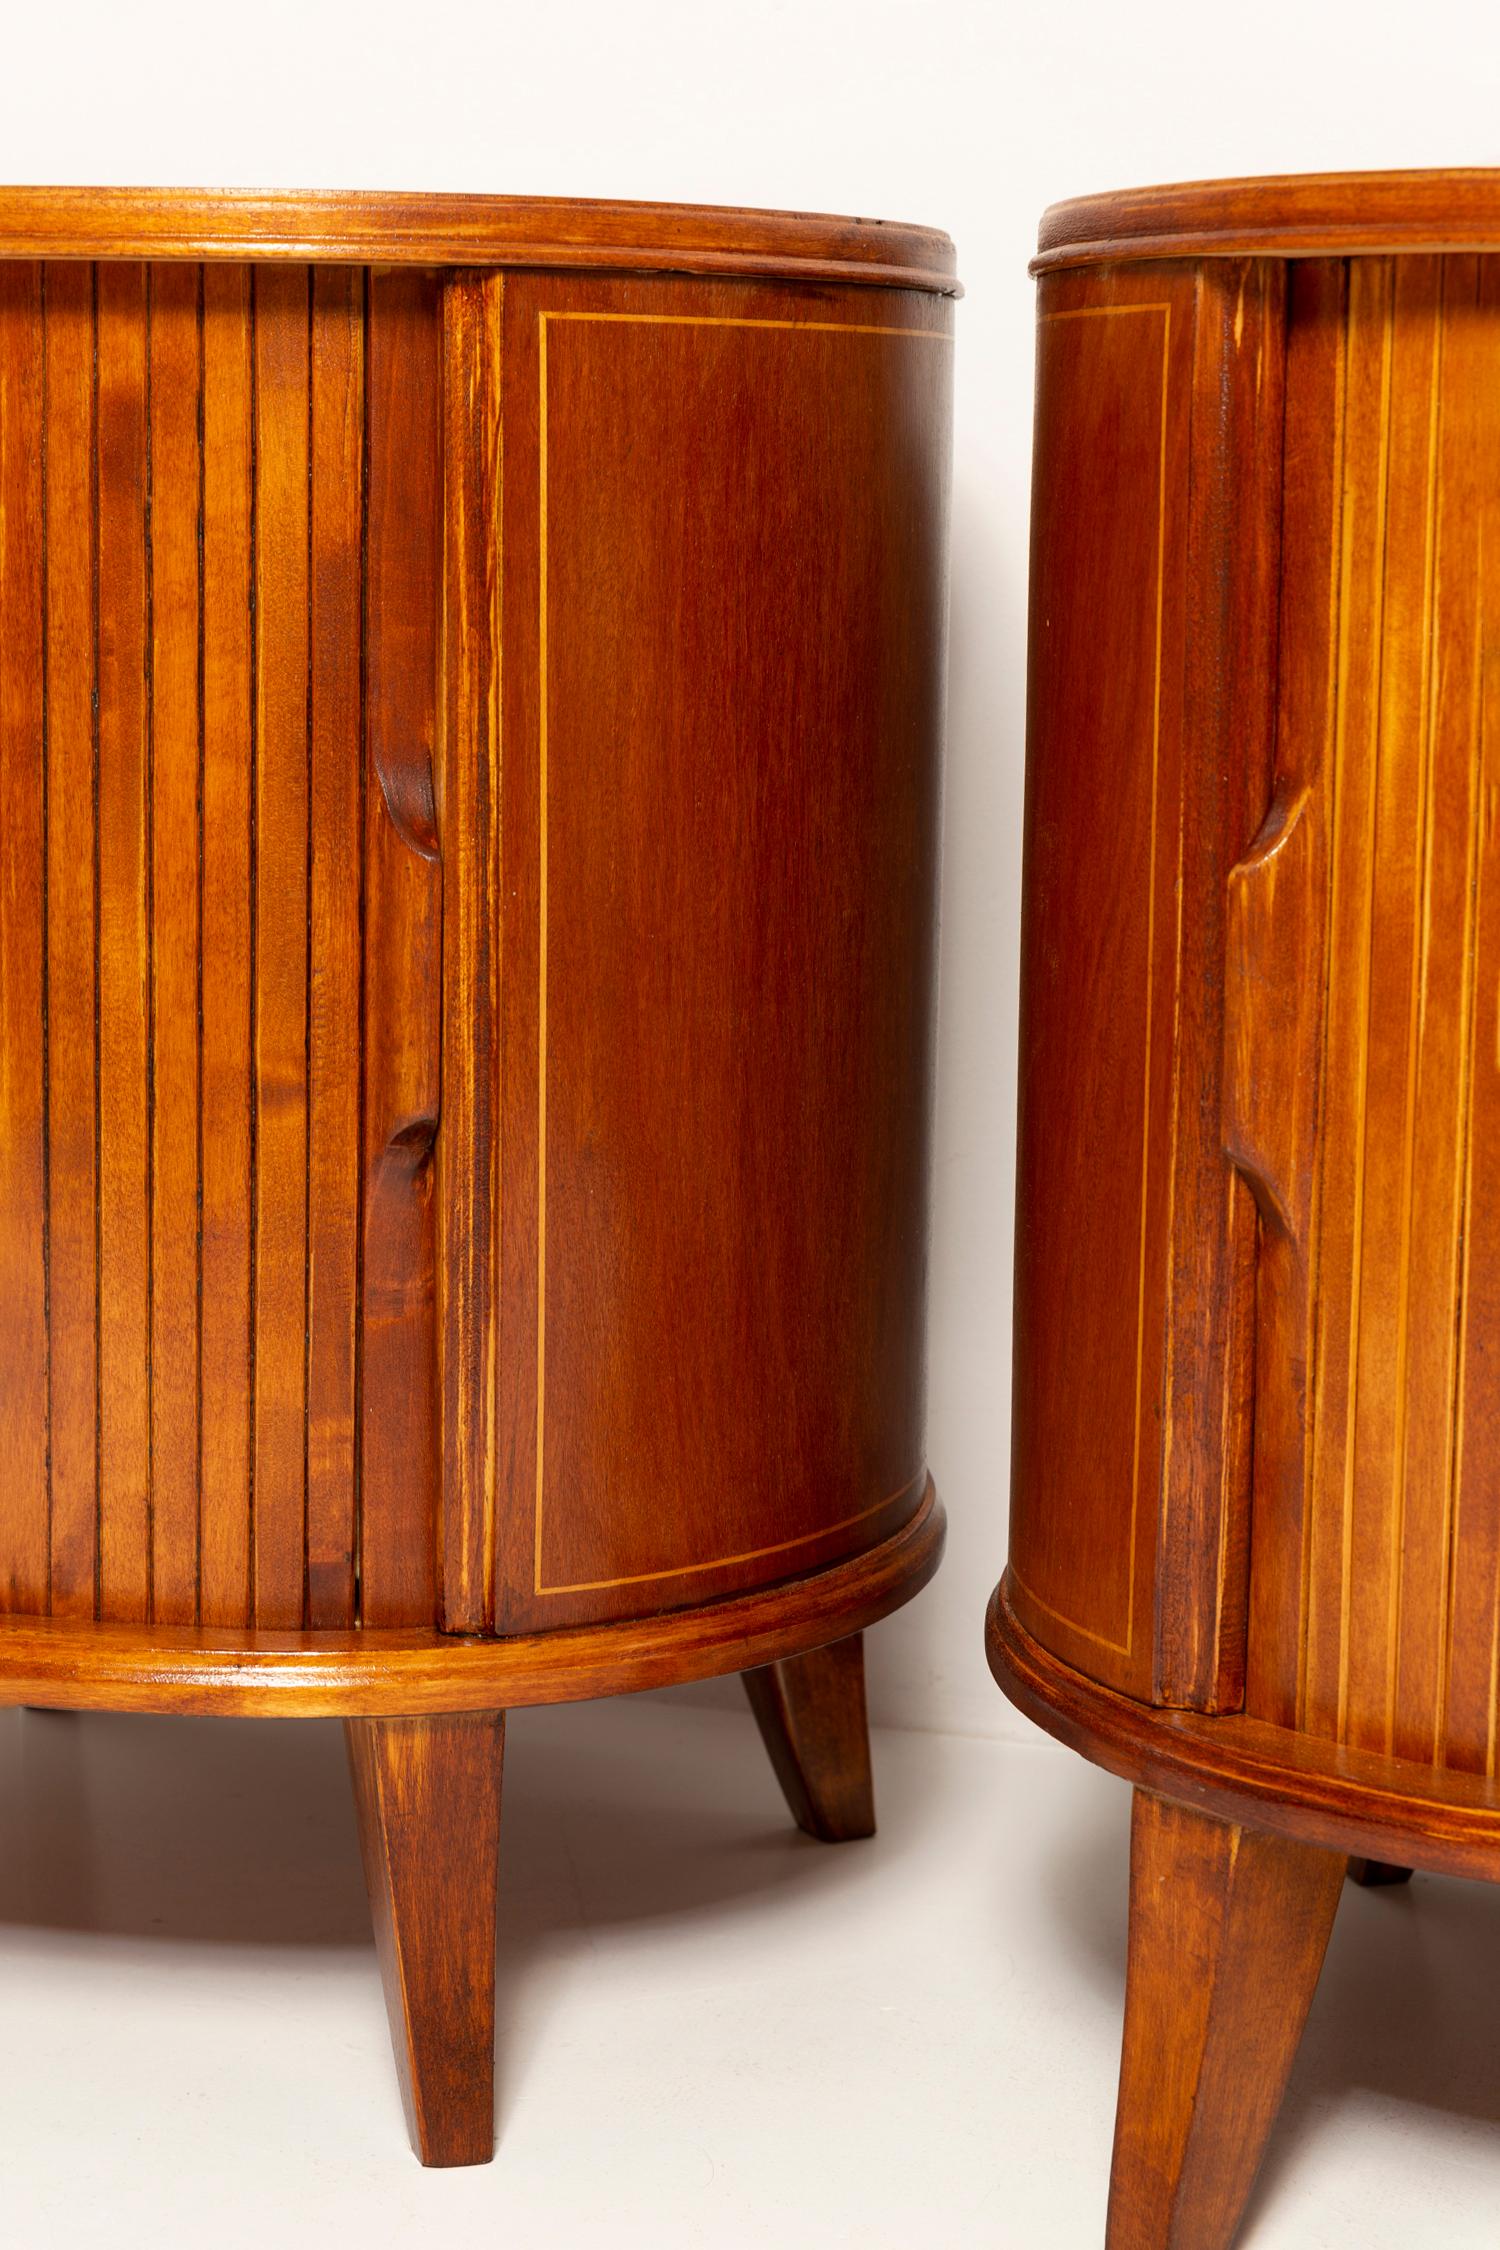 Polish Set of Two Mid-Century Vintage Night Tables, Beech Wood, Europe, 1960s For Sale